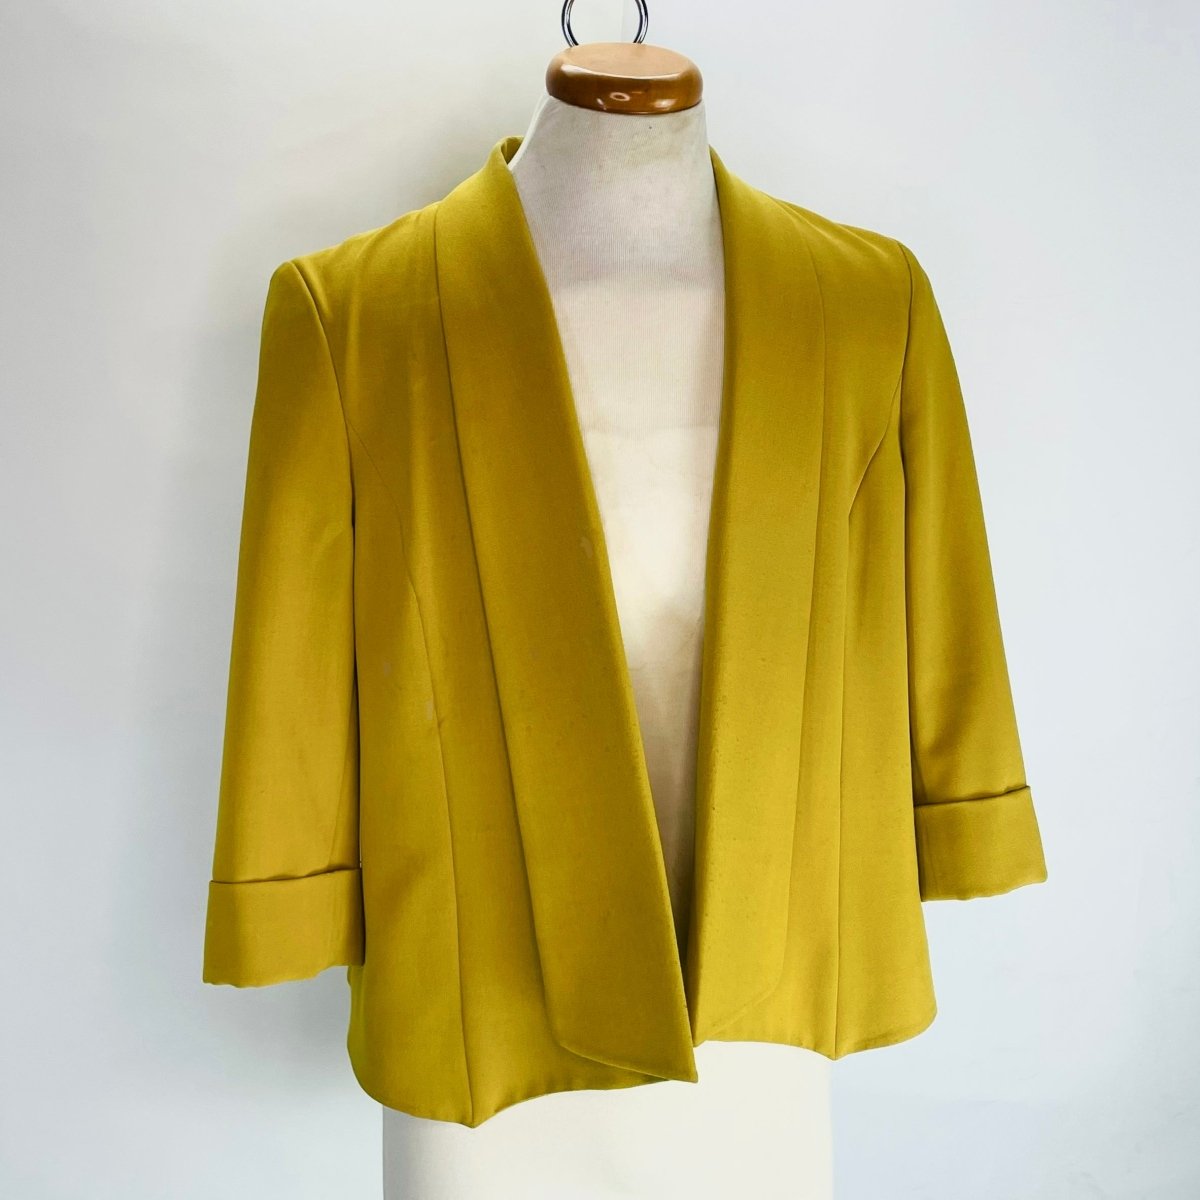 Mustard Blazer with ¾ Length Sleeves - Hart & Hive